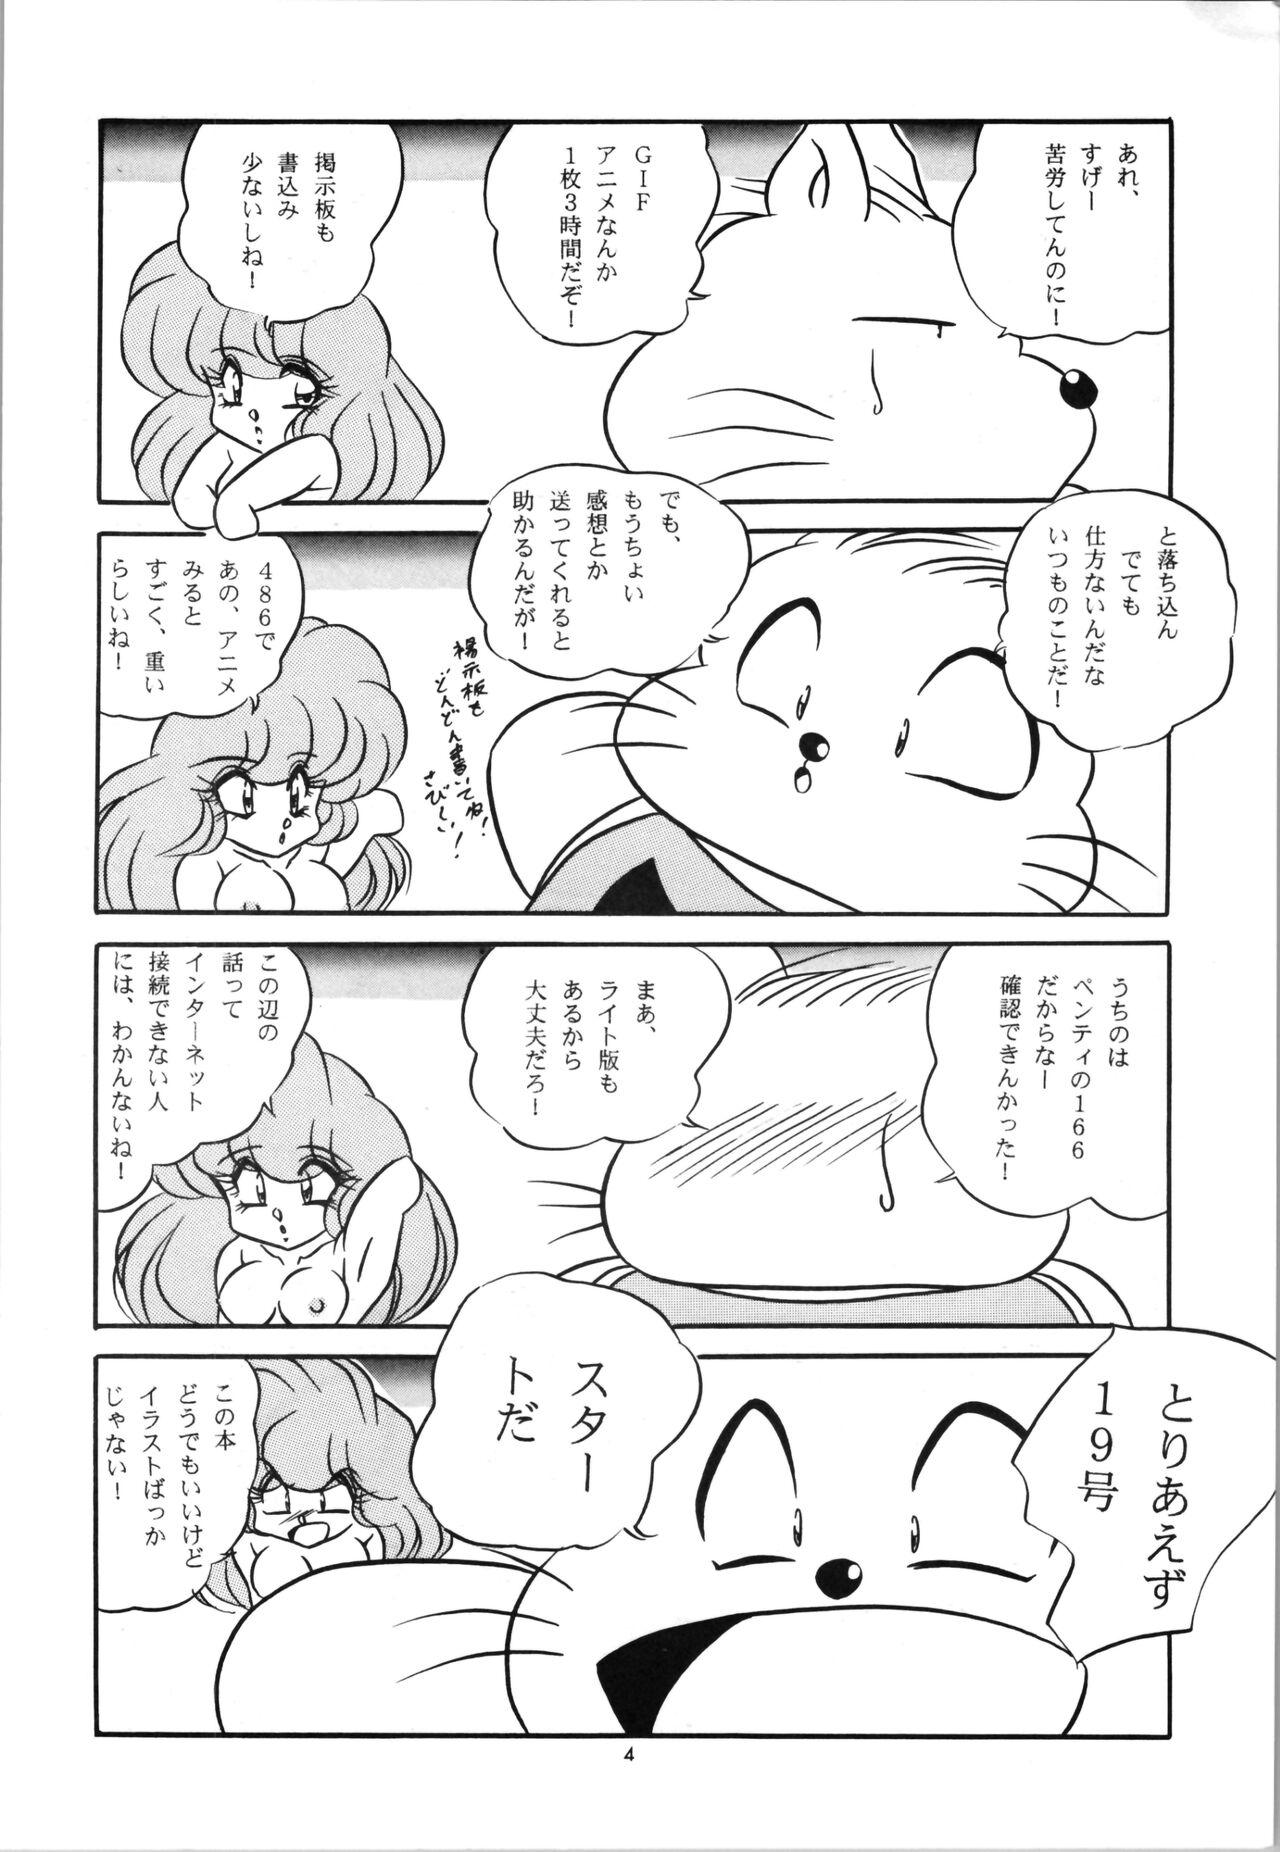 Sapphic C-COMPANY SPECIAL STAGE 19 - Ranma 12 Black - Page 6